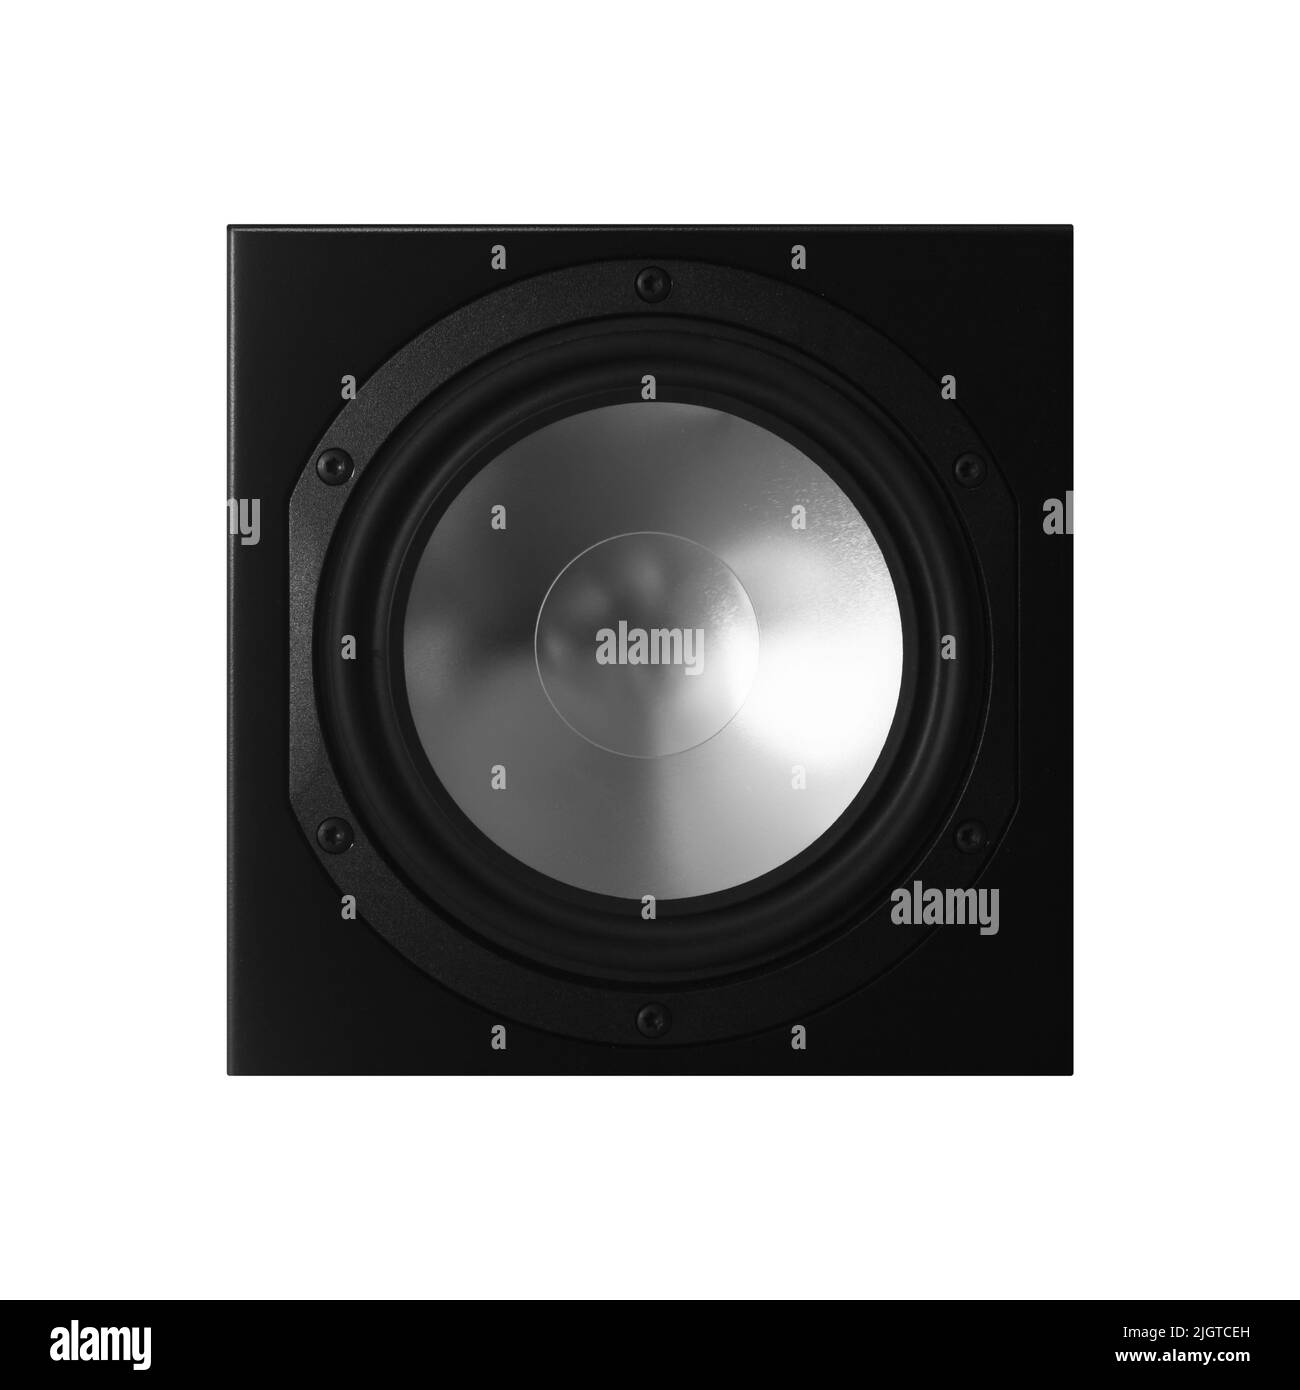 Audio speaker in black body, subwoofer front view isolated on white background Stock Photo